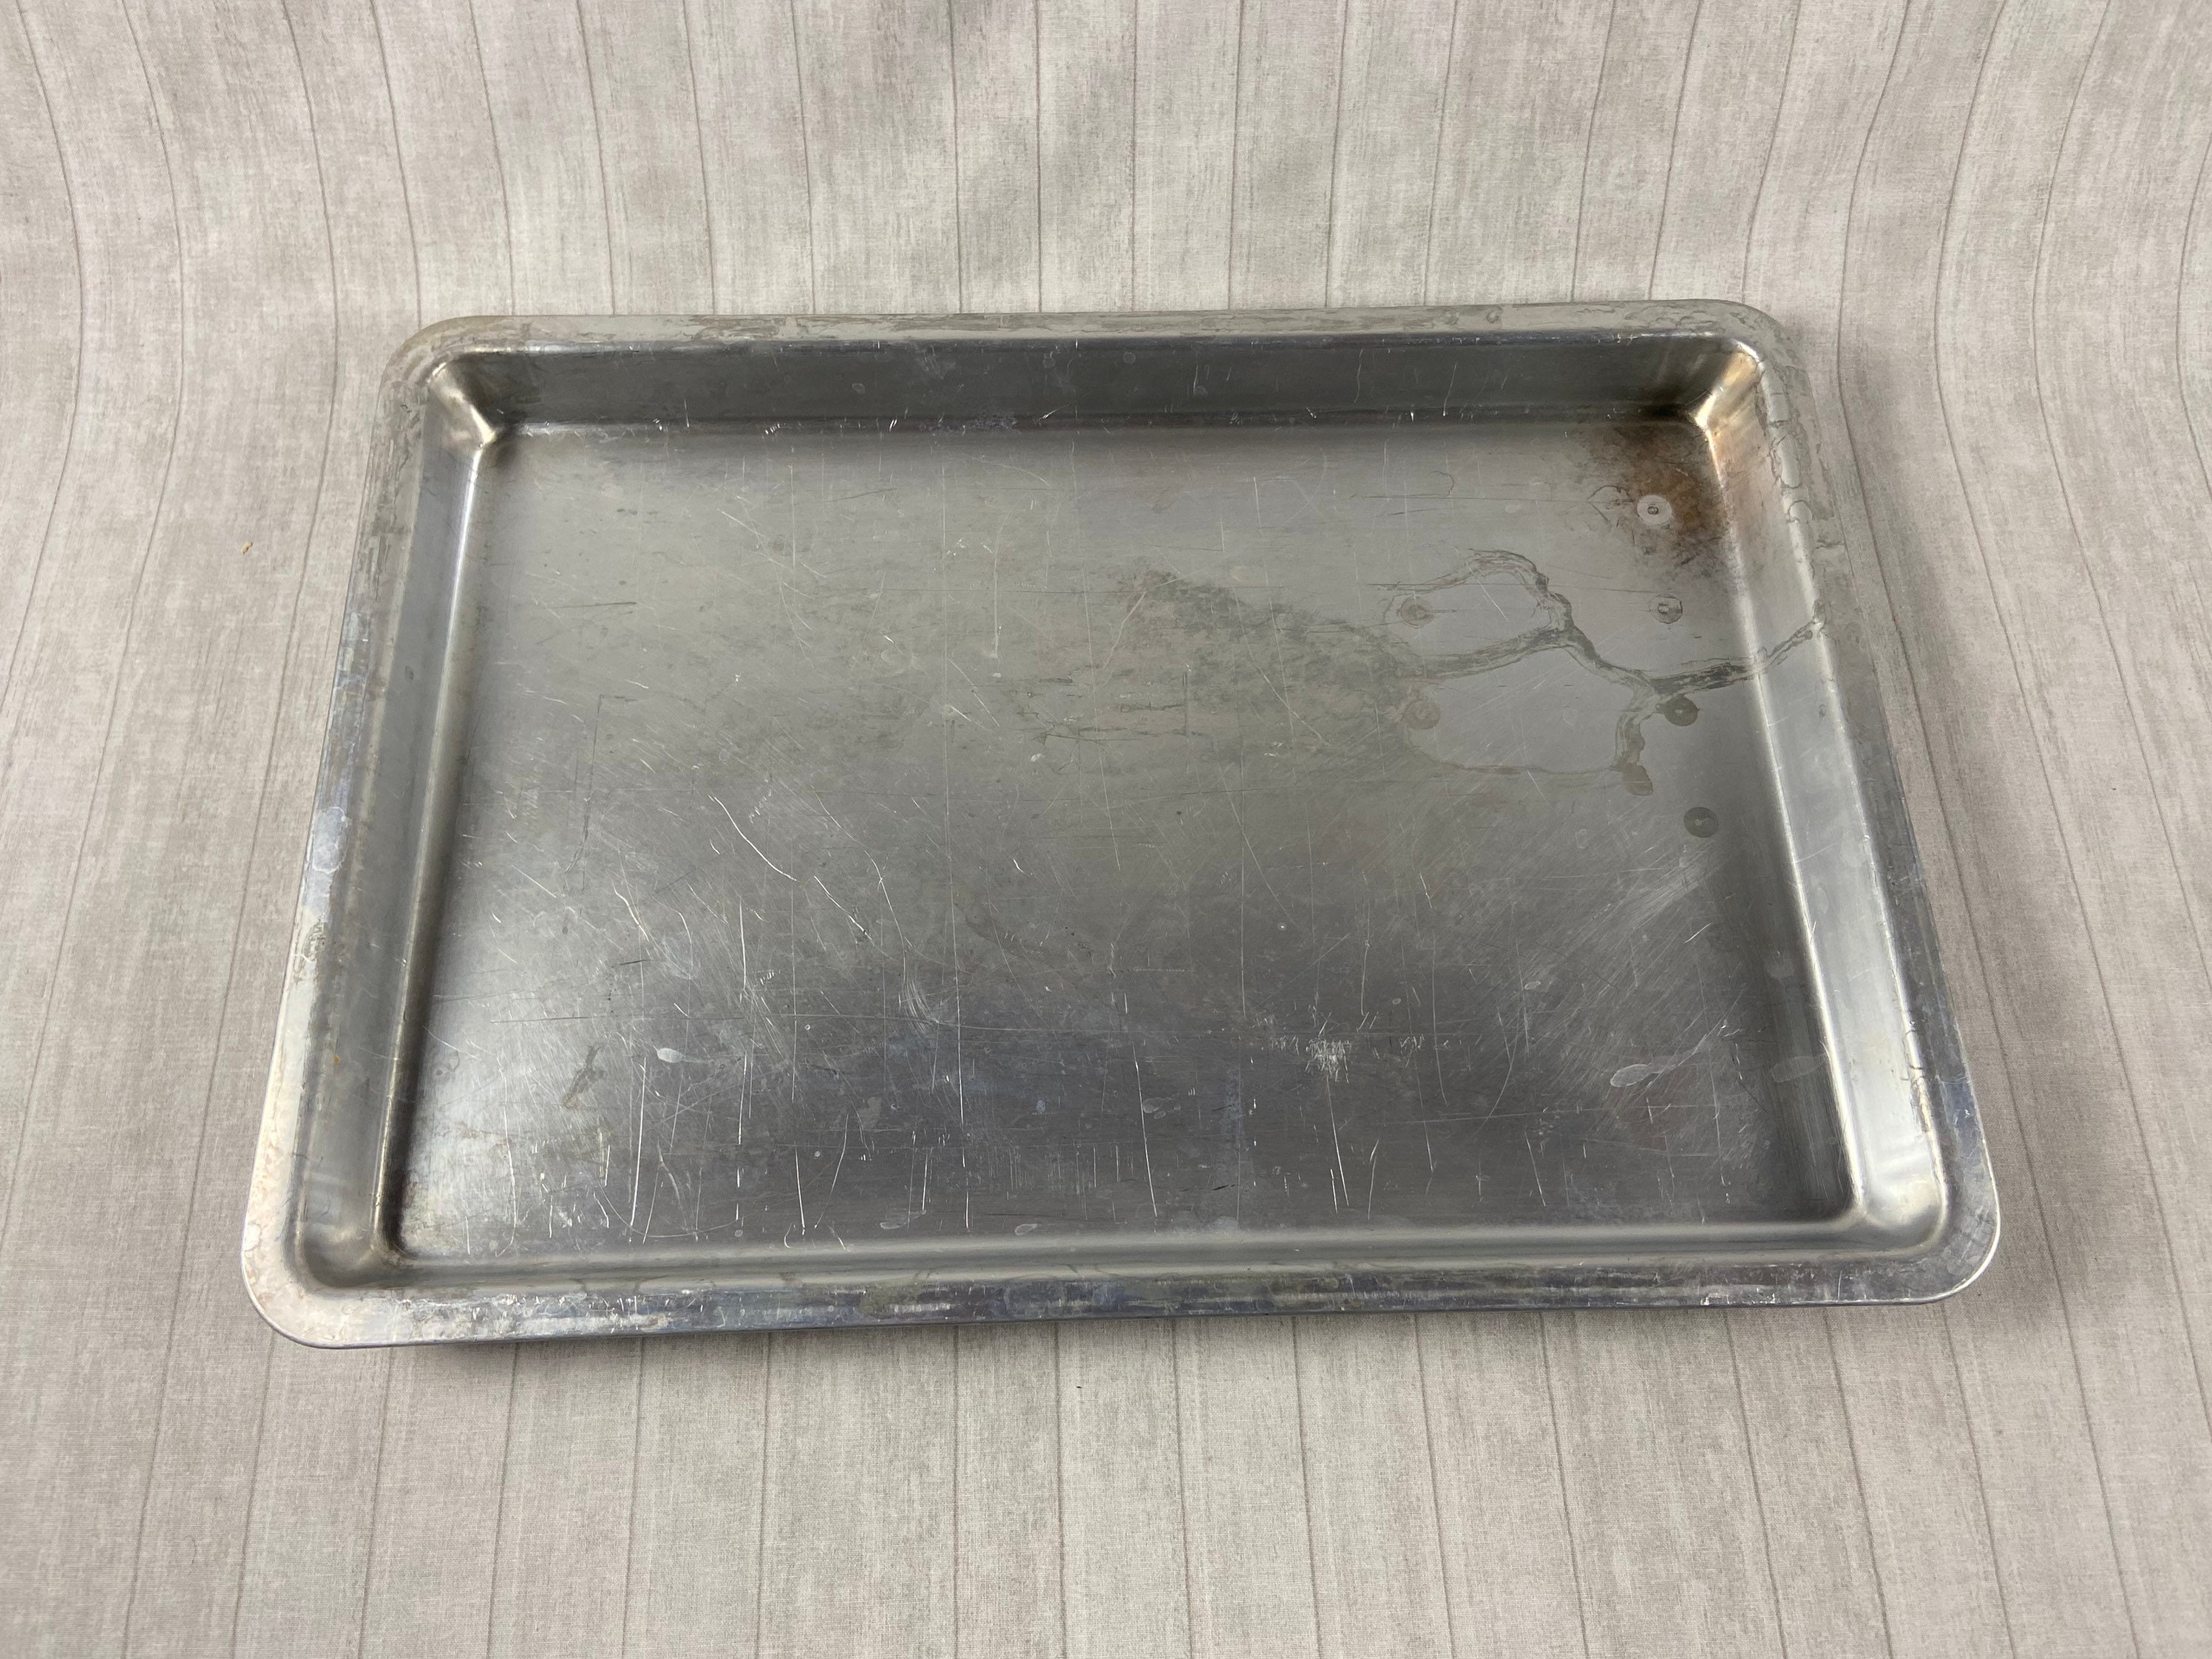 REMA Air Bake Jelly Roll Pan Baking Vintage Metal Double Wall